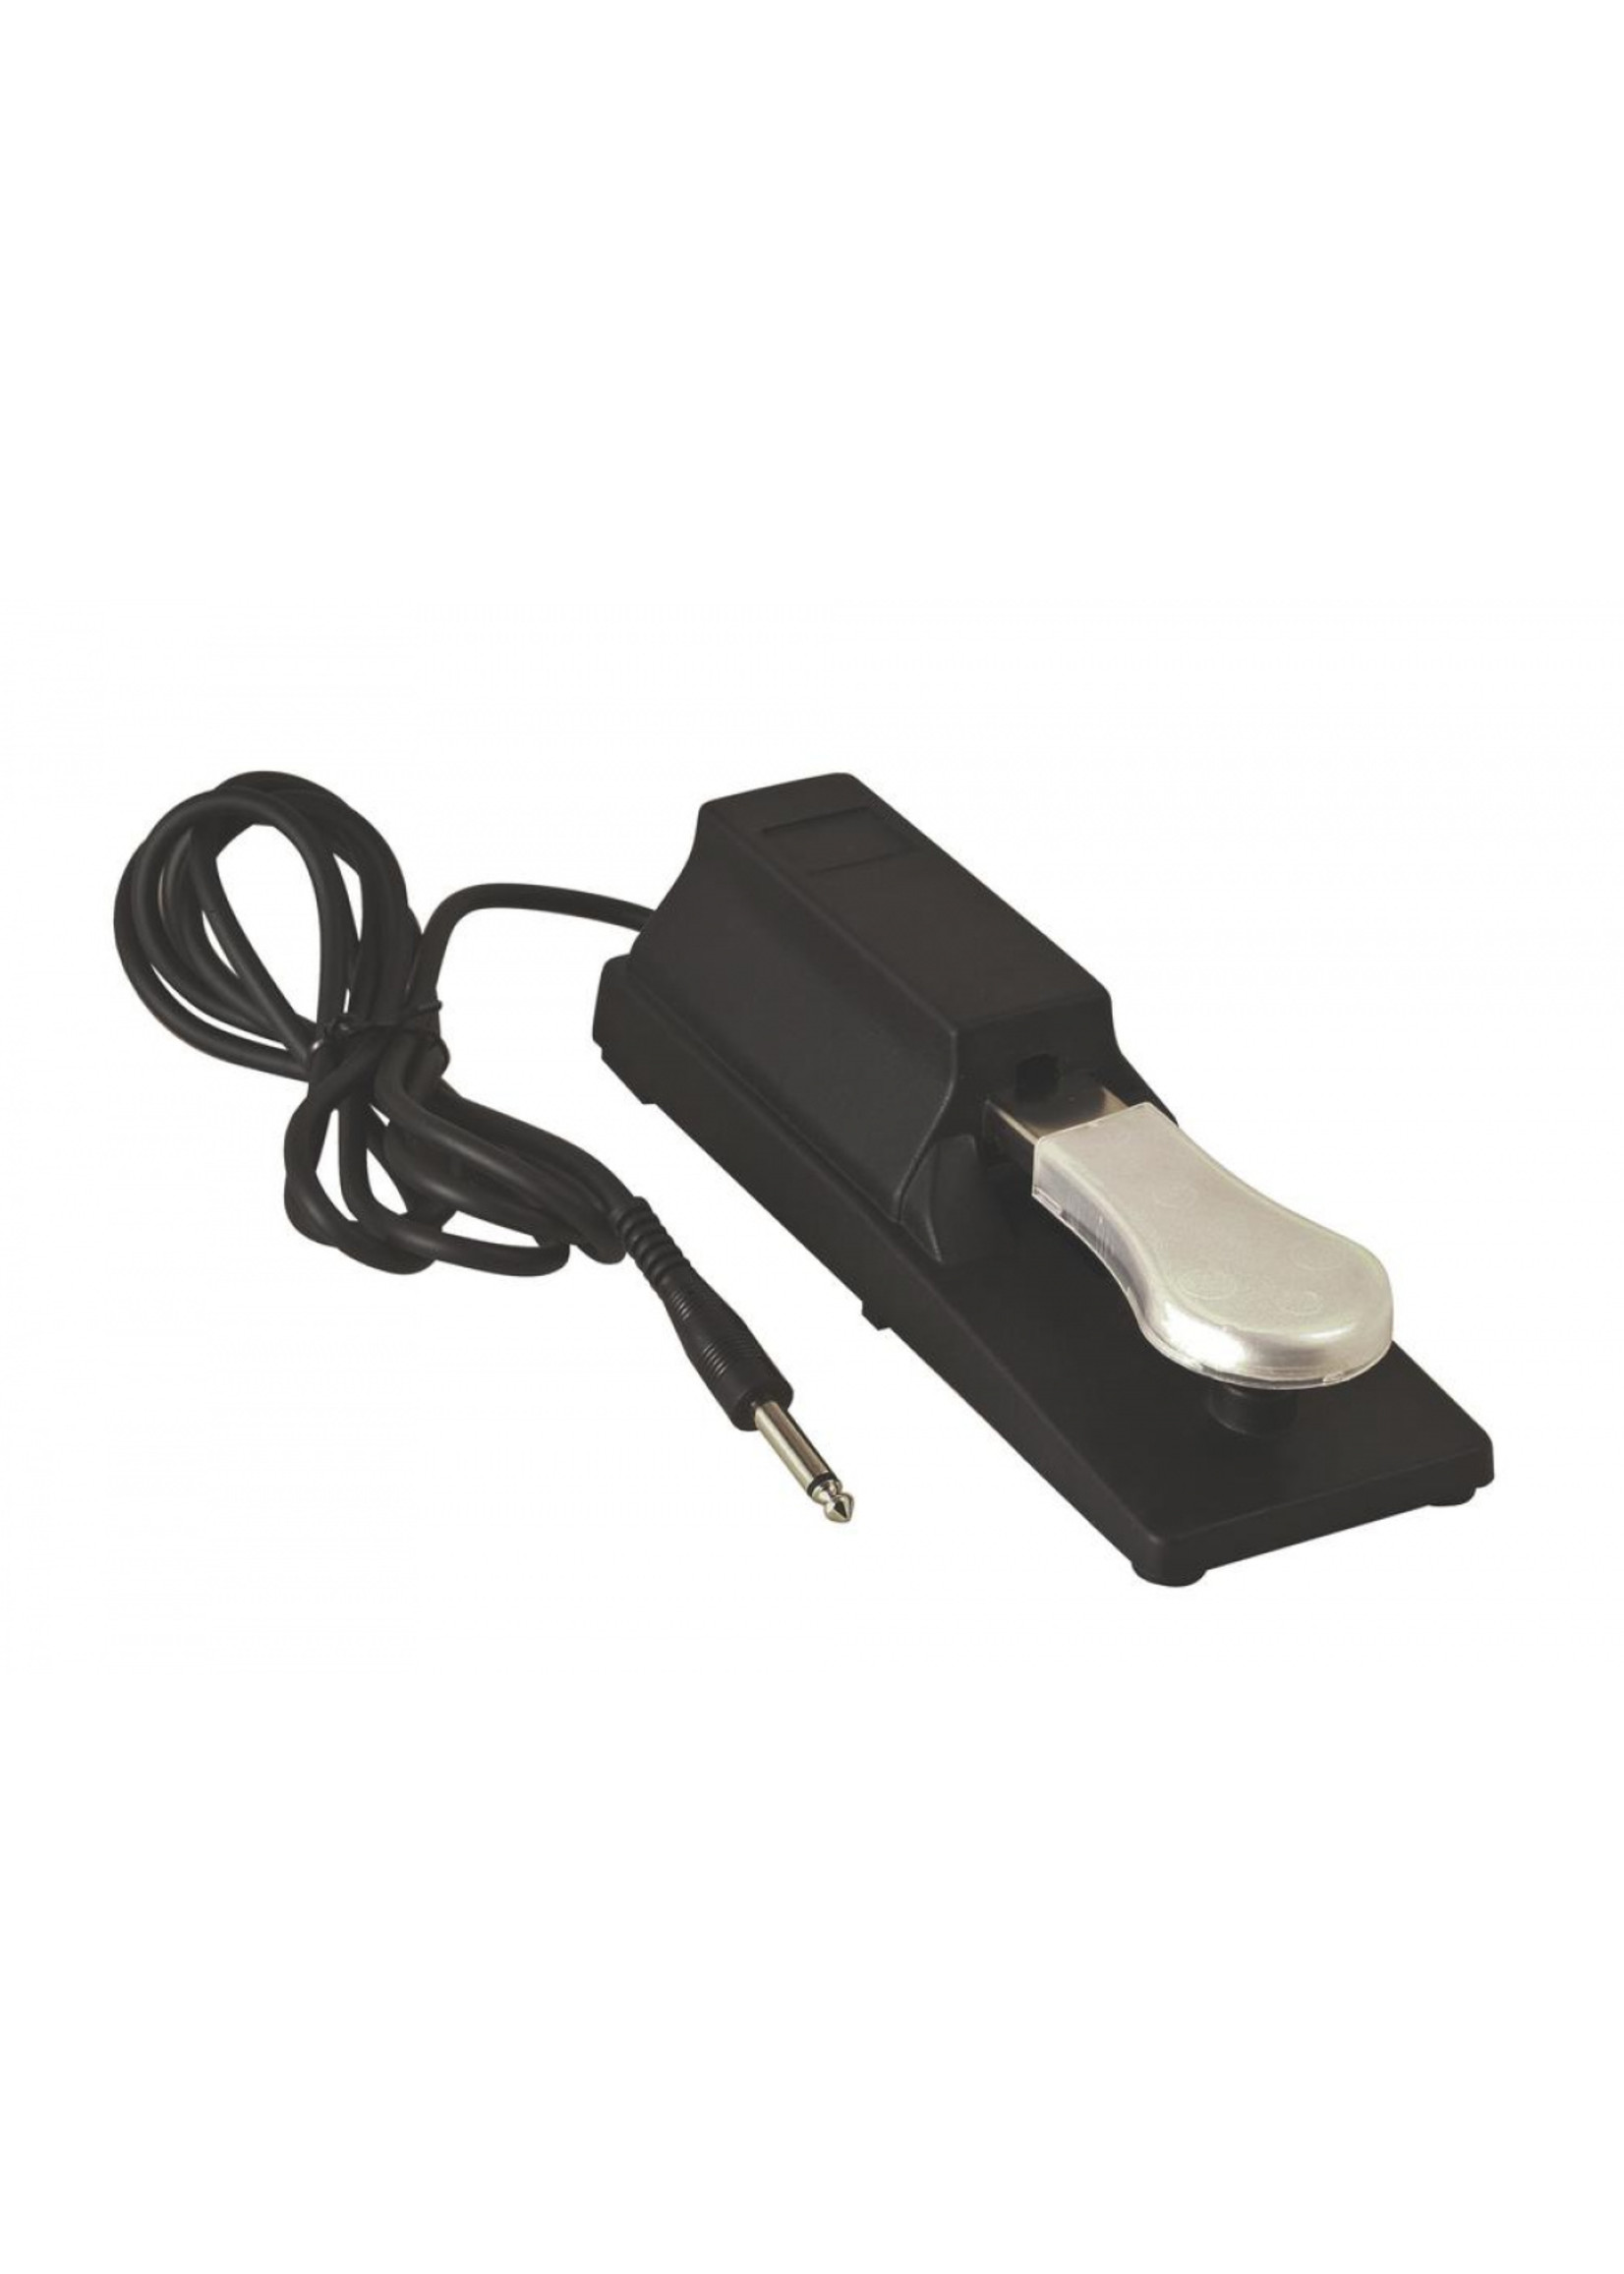 On-Stage Stands On-Stage Stands KSP100 Keyboard Sustain Pedal